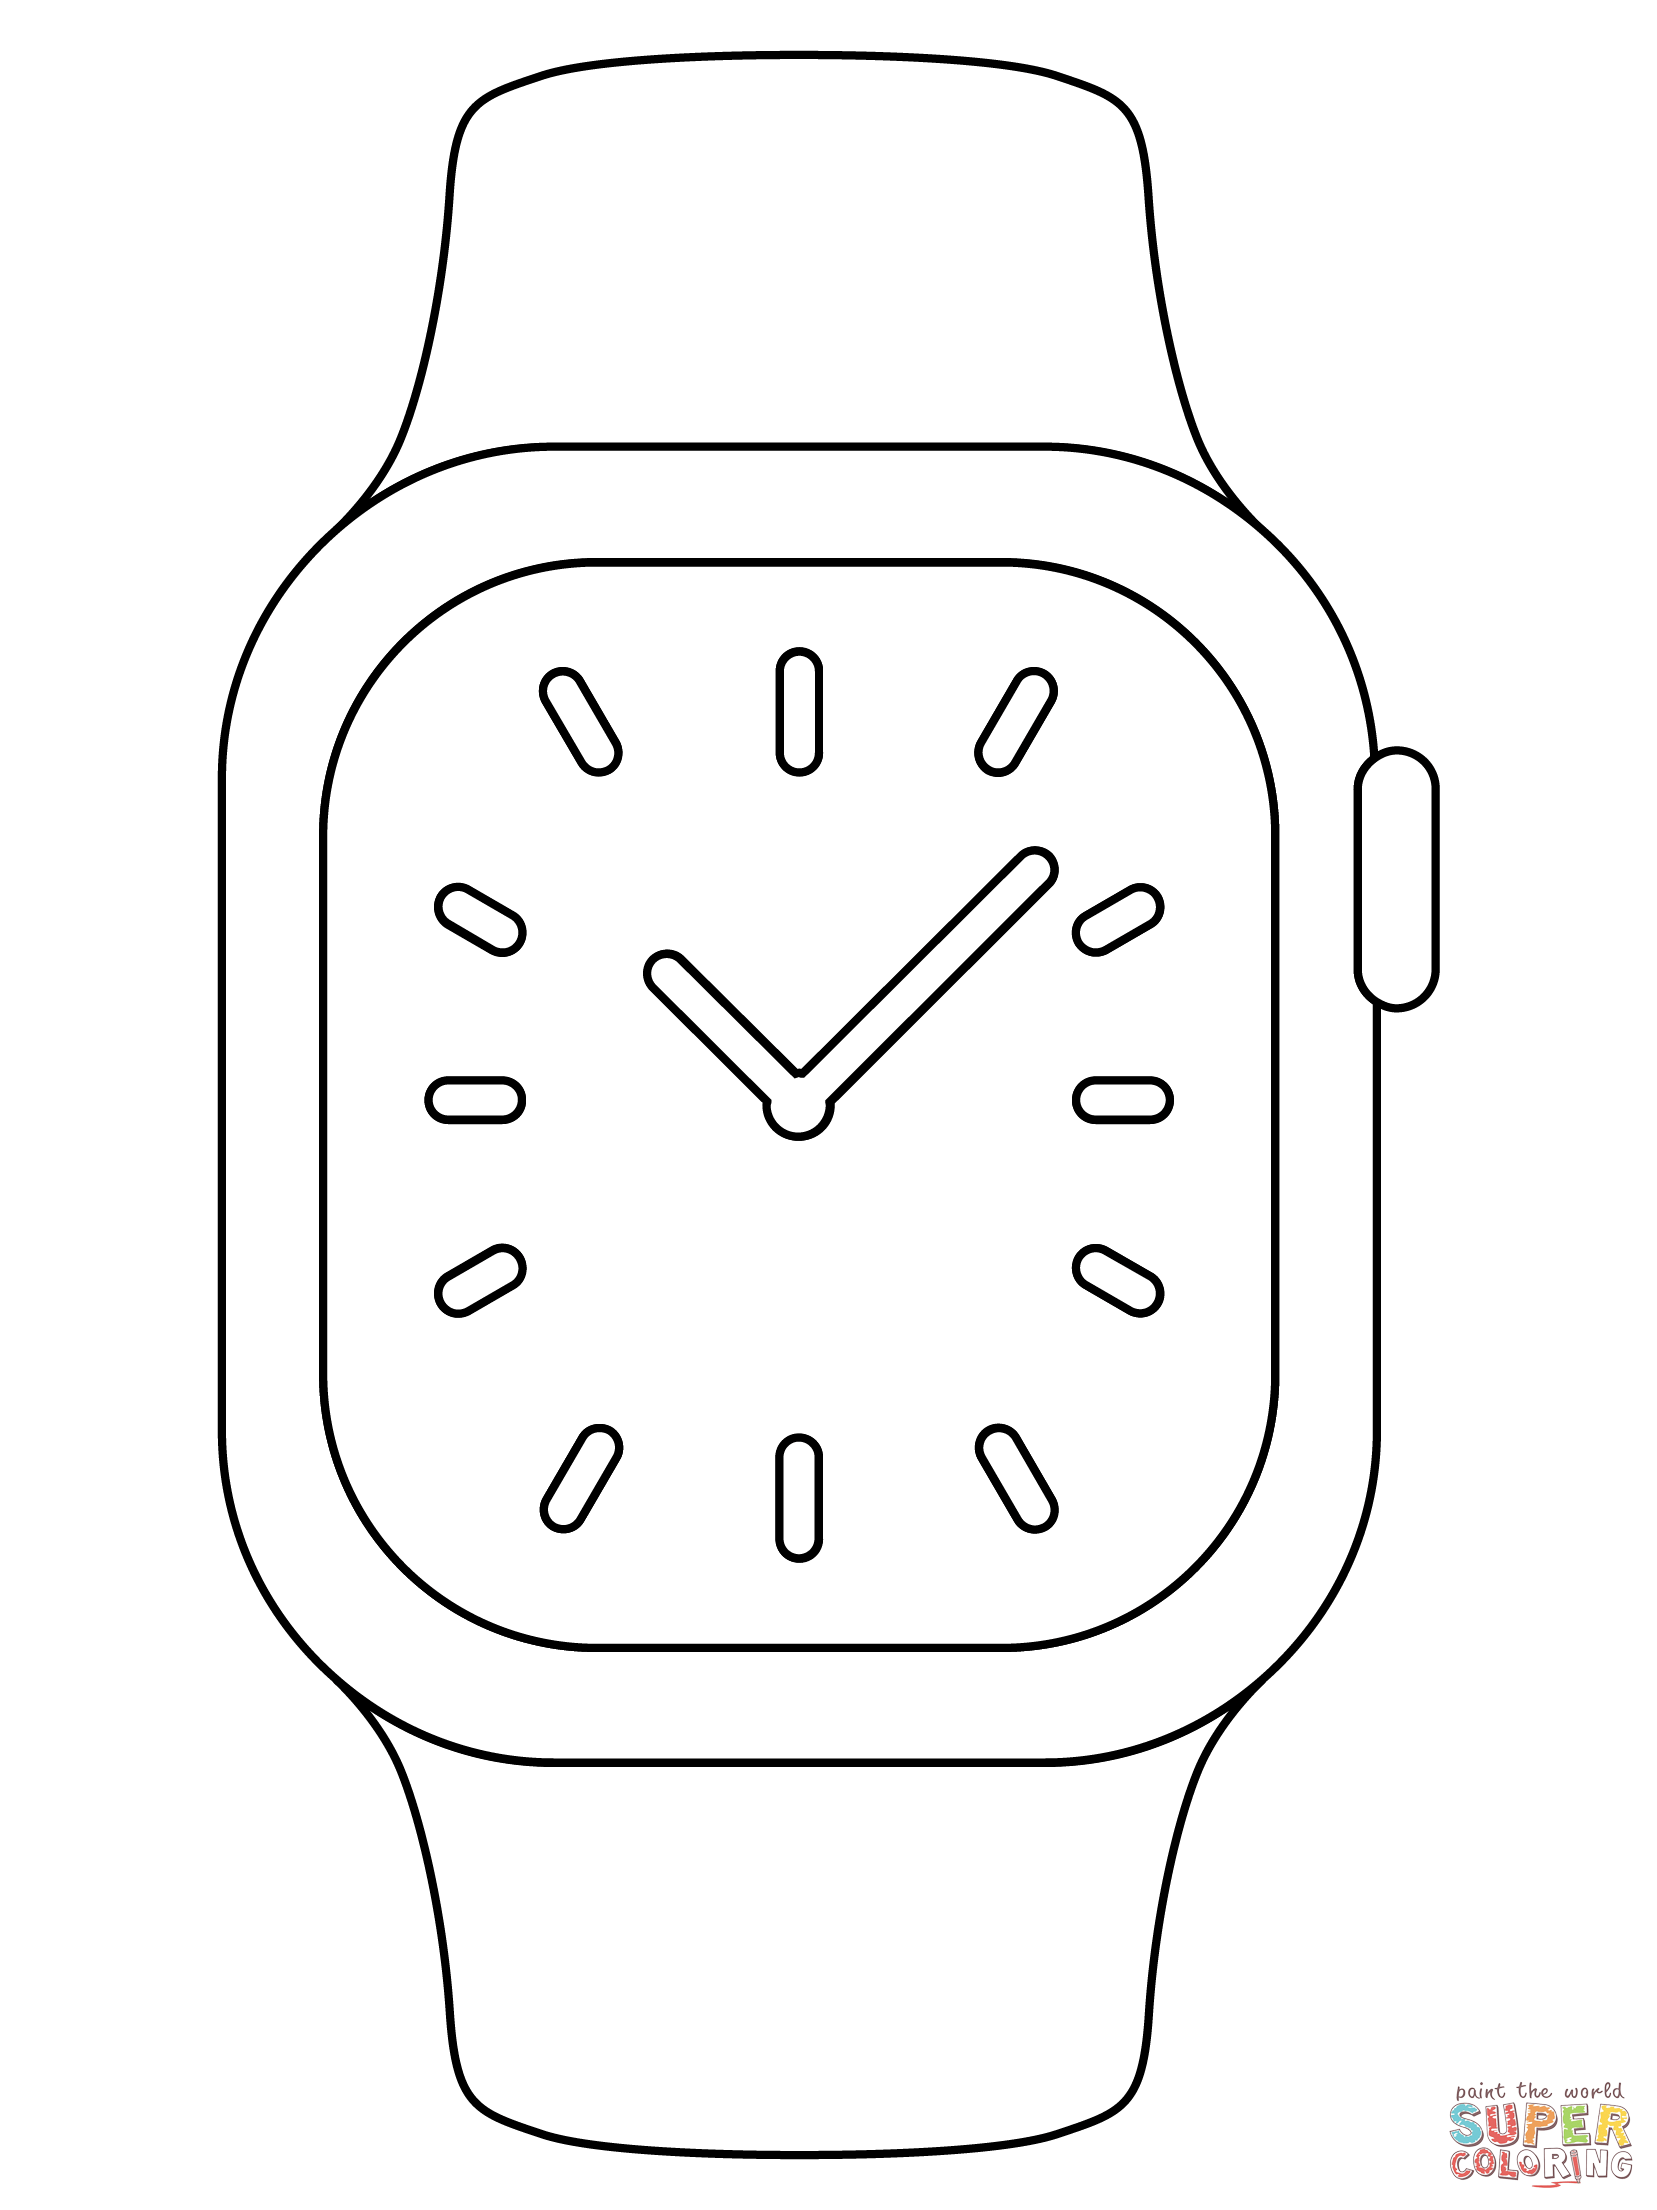 Apple watch coloring page free printable coloring pages